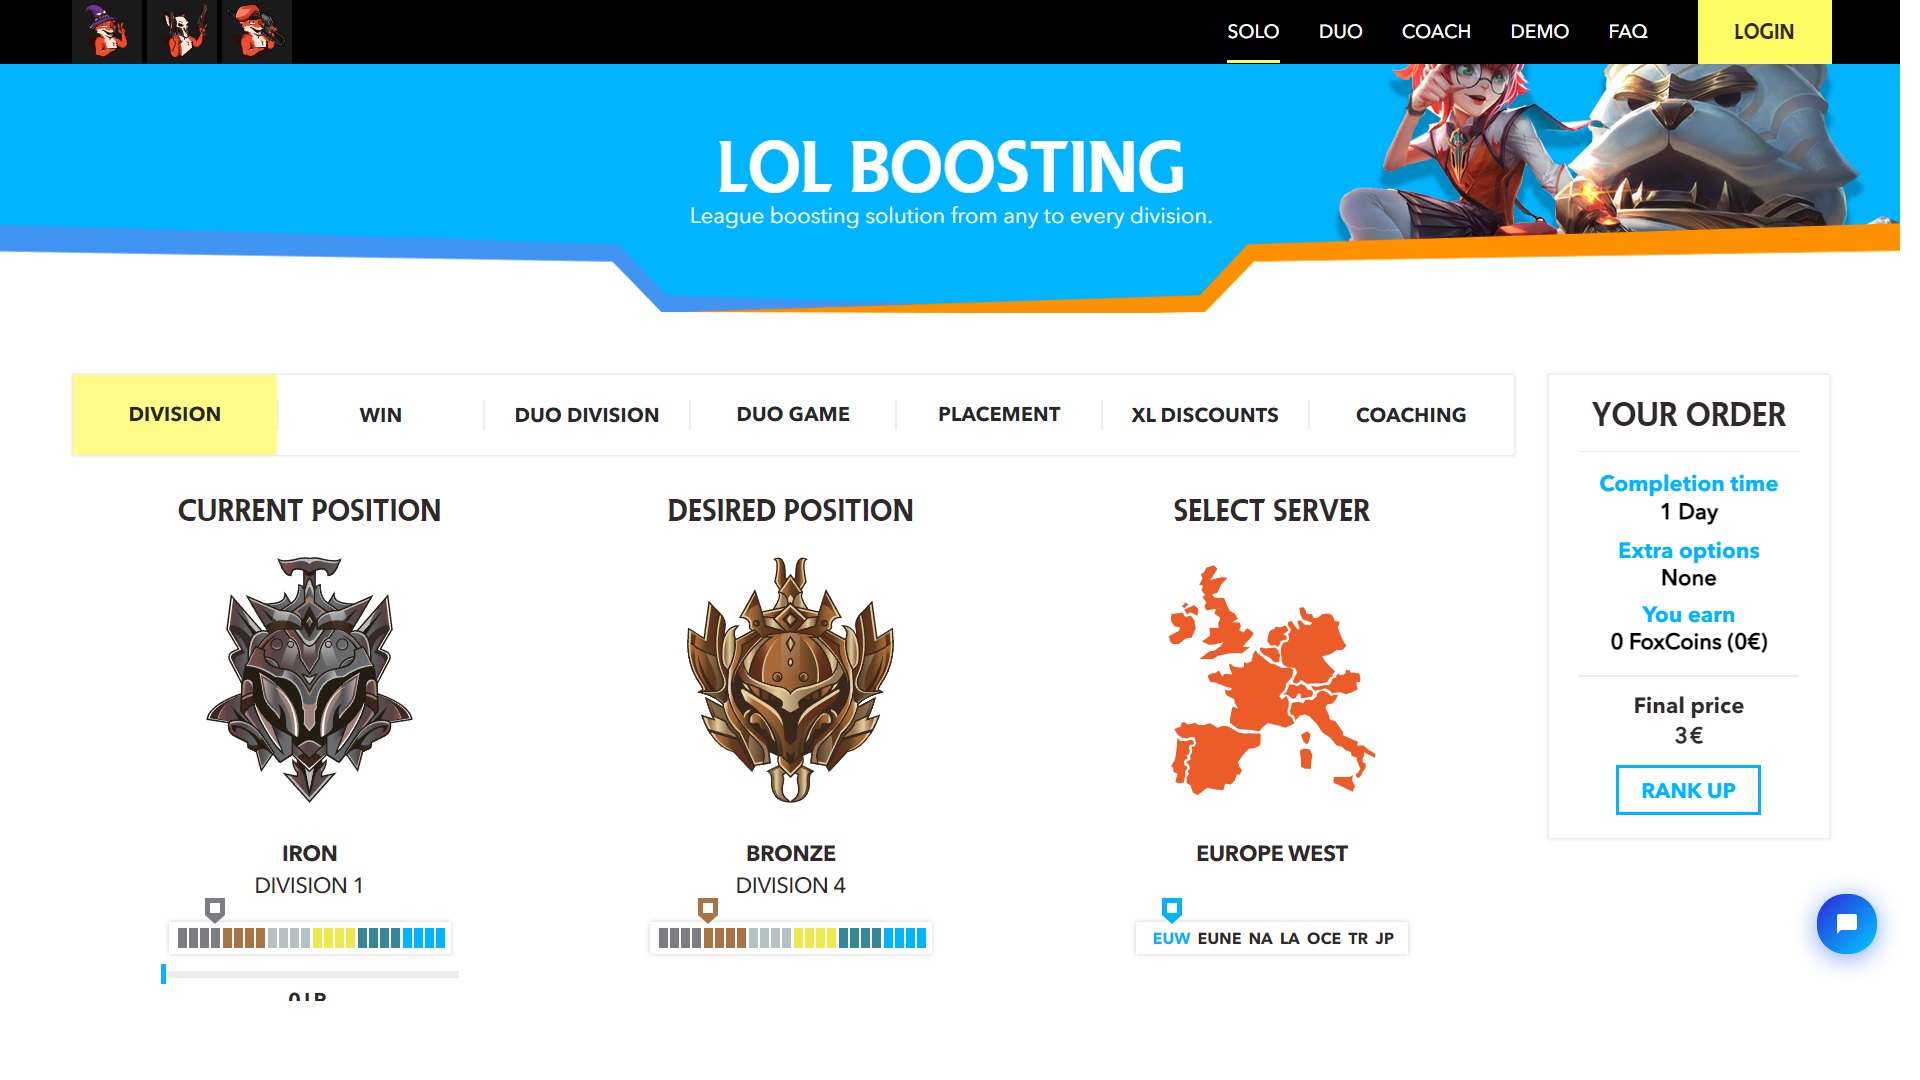 League Boosting - Your Global League Boosting Solution